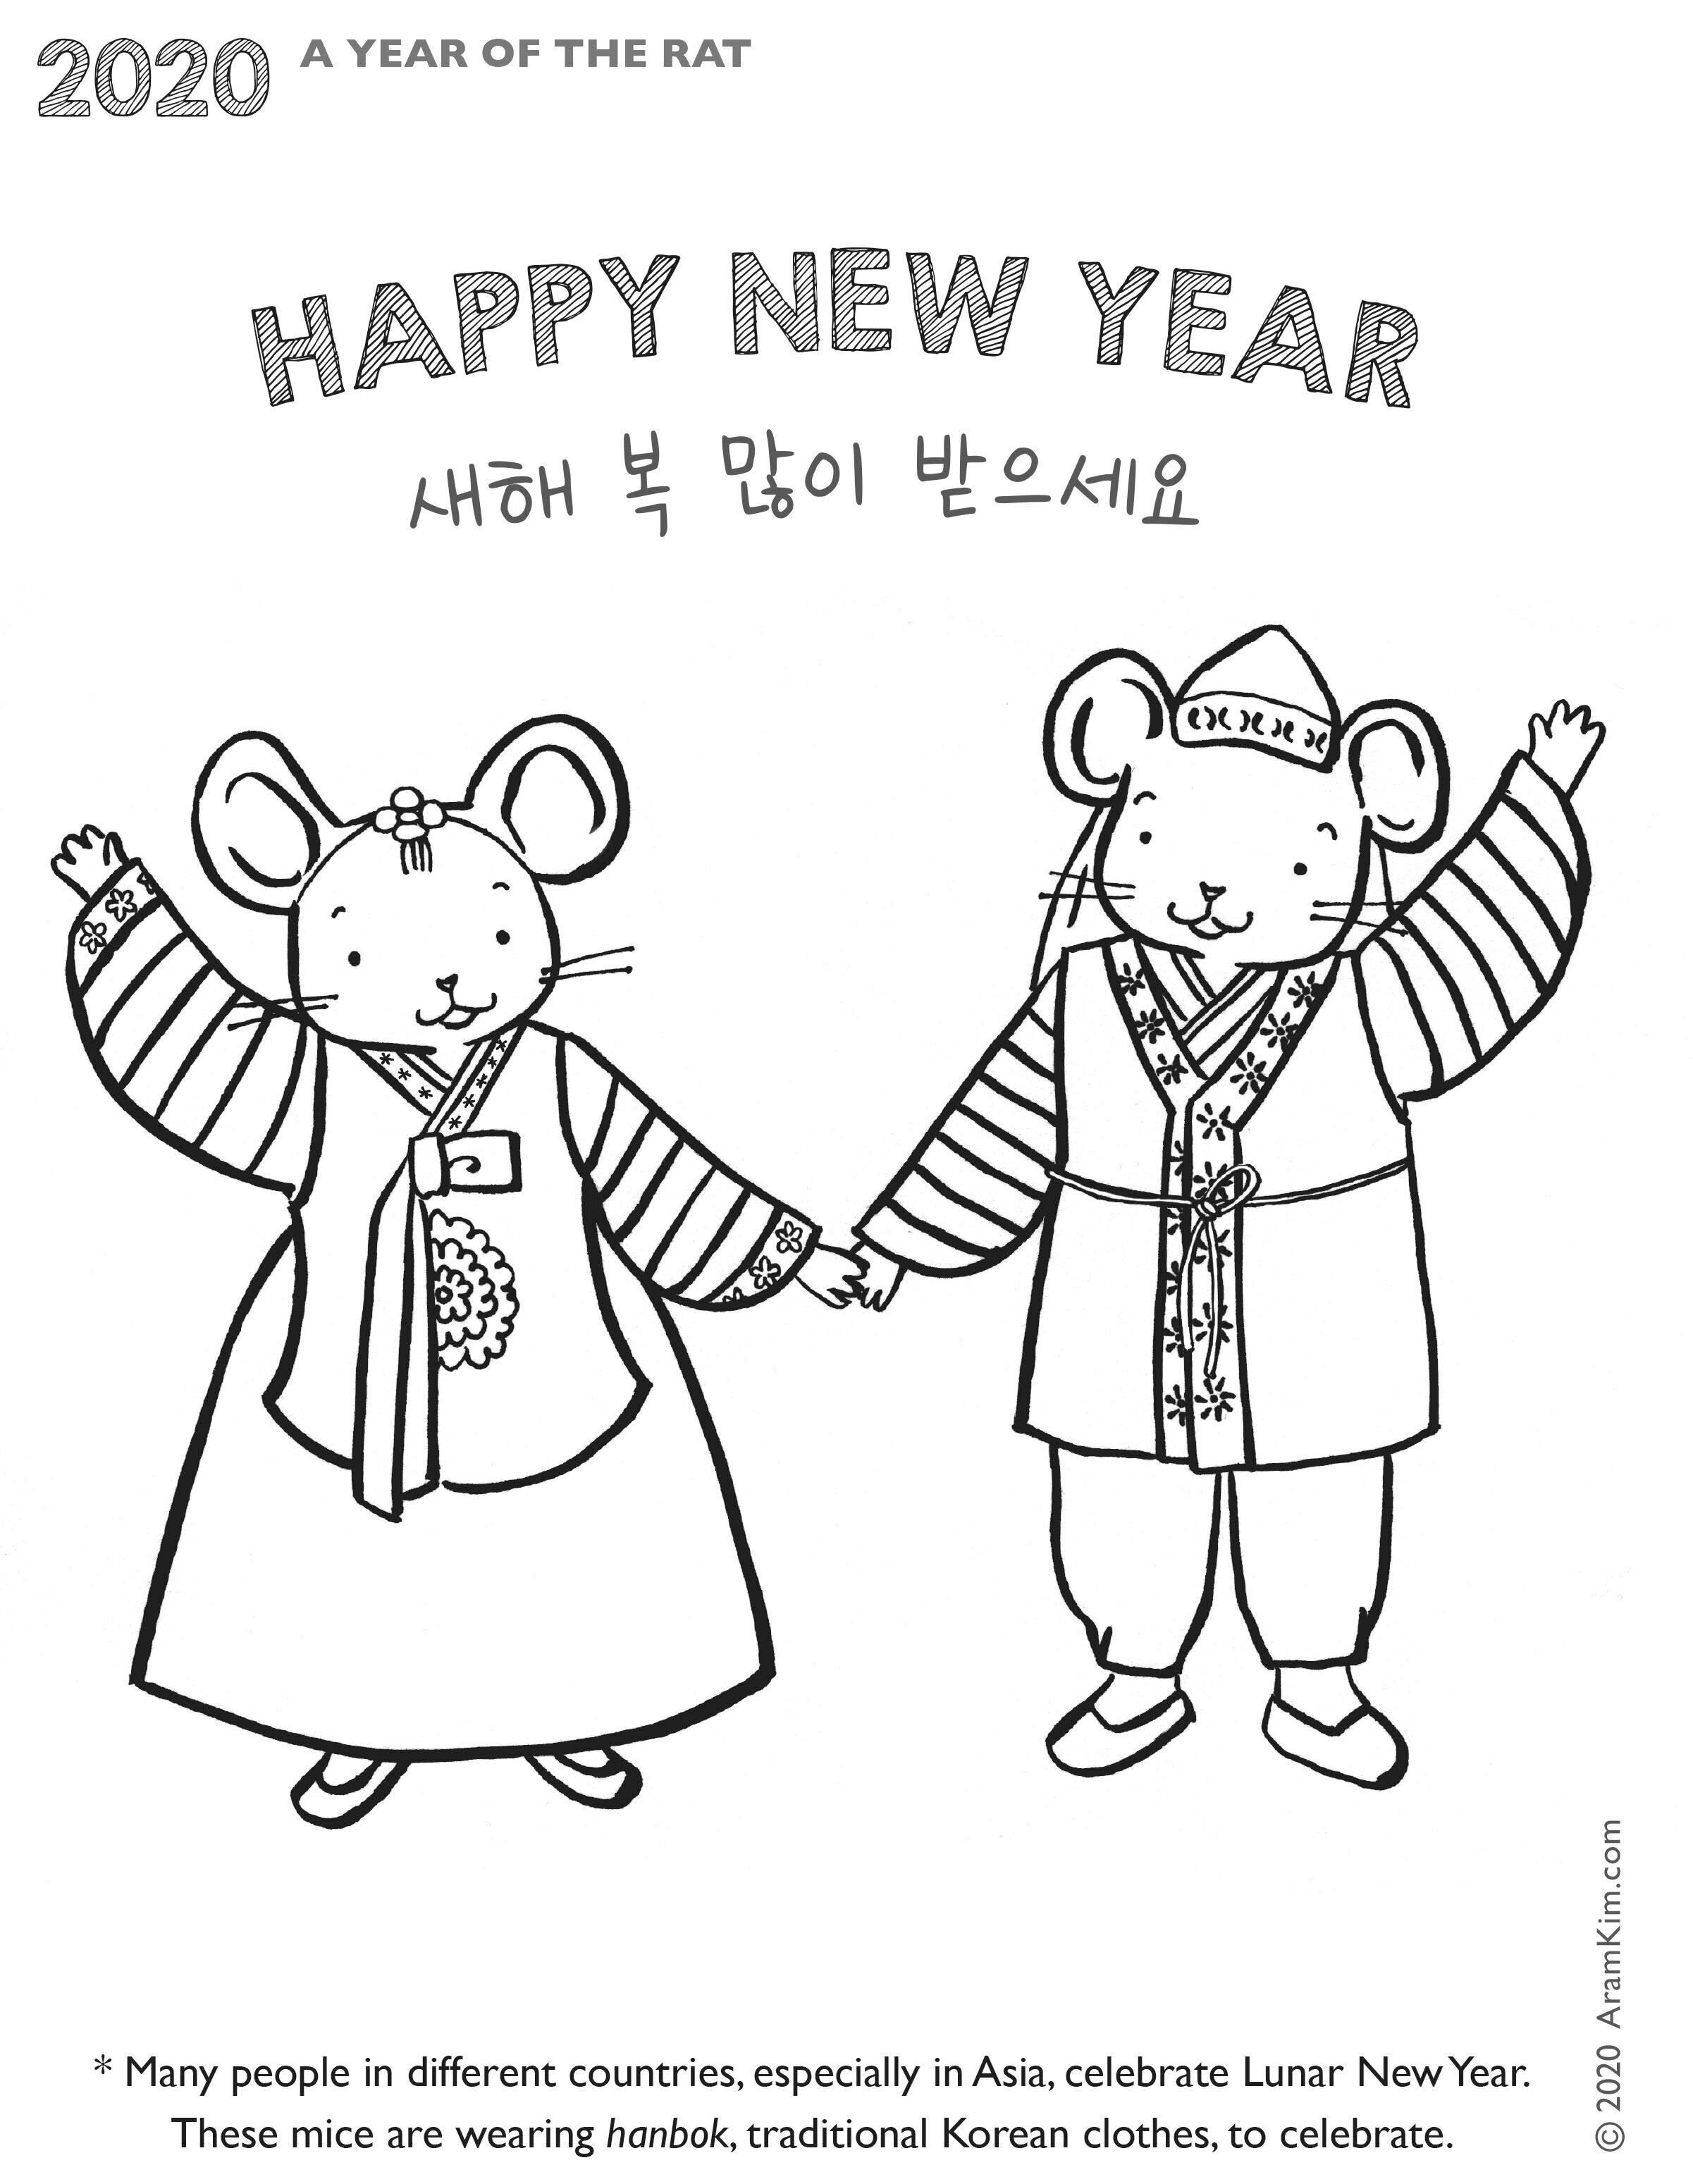 2020 Lunar New Year Coloring Page